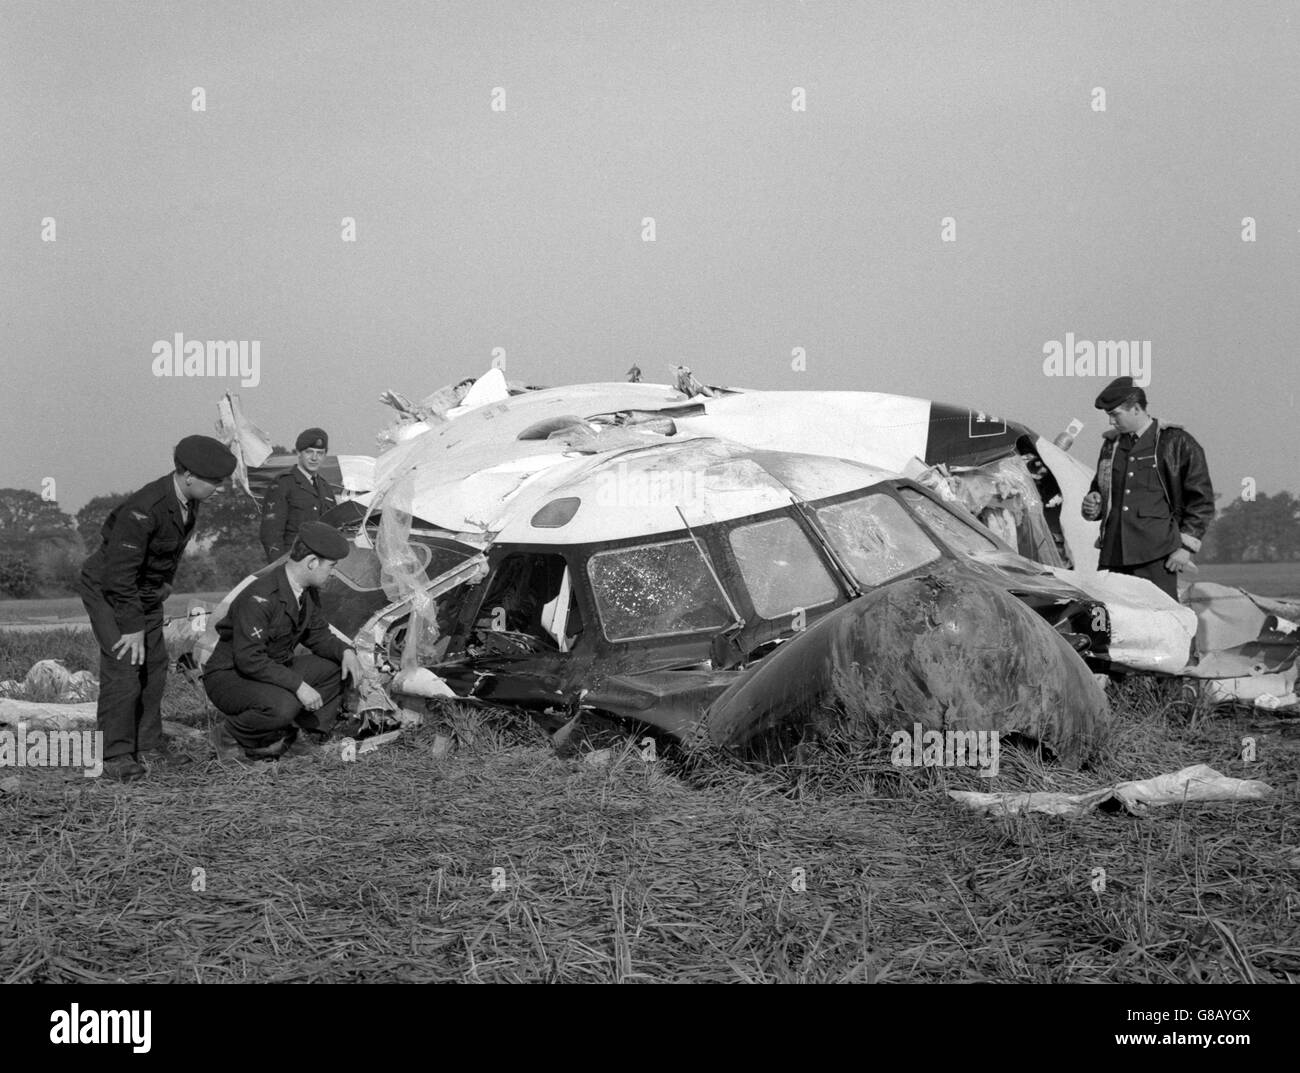 Police officers inspecting the wreckage of a Hawker Siddeley Trident jet airliner in a wheat field, near Felthorpe, Norfolk. It had crashed killing all four crew members. The Trident was on a proving flight before being delivered to BEA. It carried no passengers. It was the first time a Trident has been involved in a crash. Stock Photo